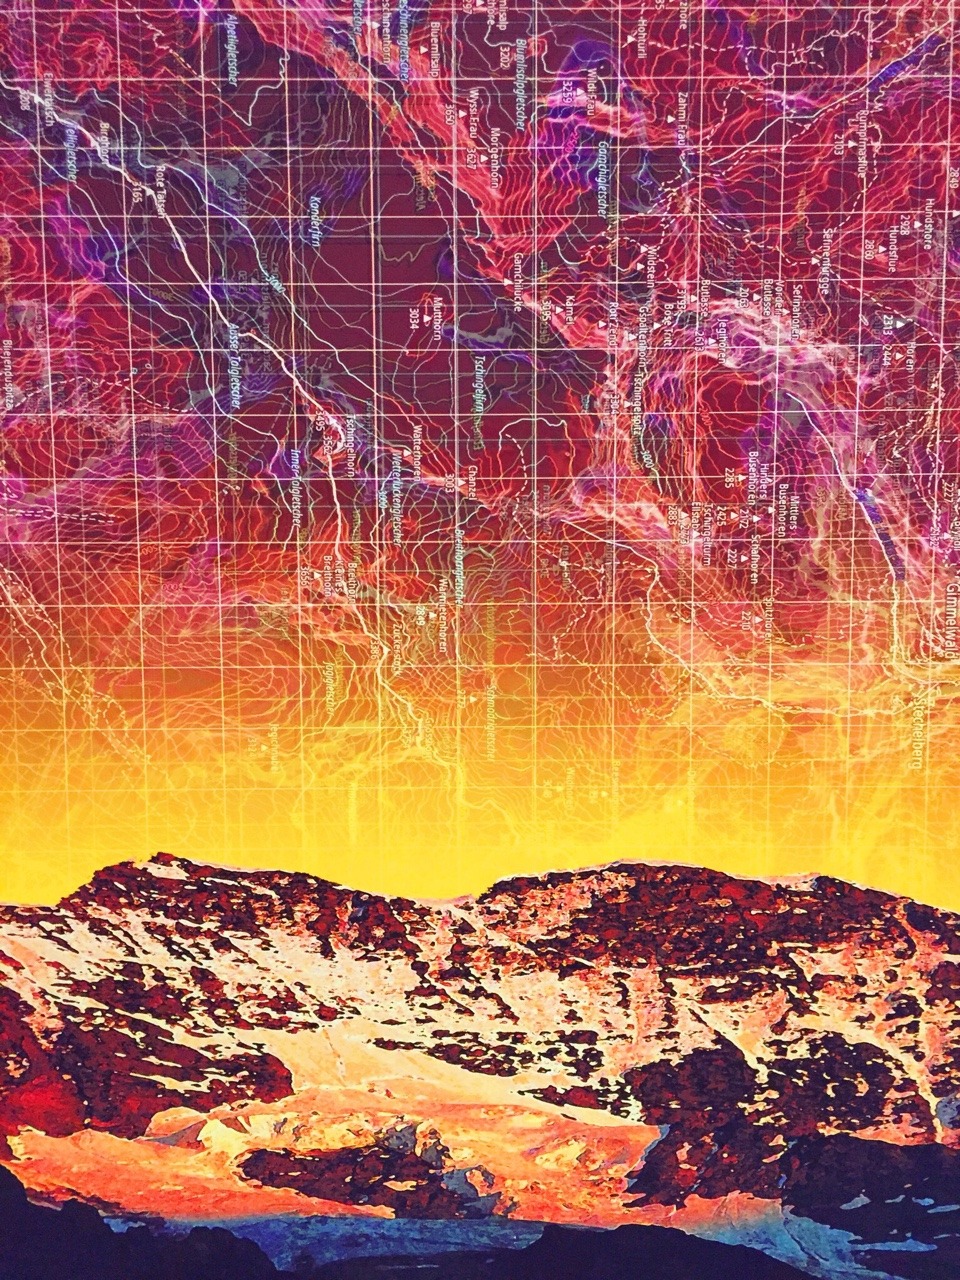 Amazing picture of a colorful mountain with a topographical map overlayed